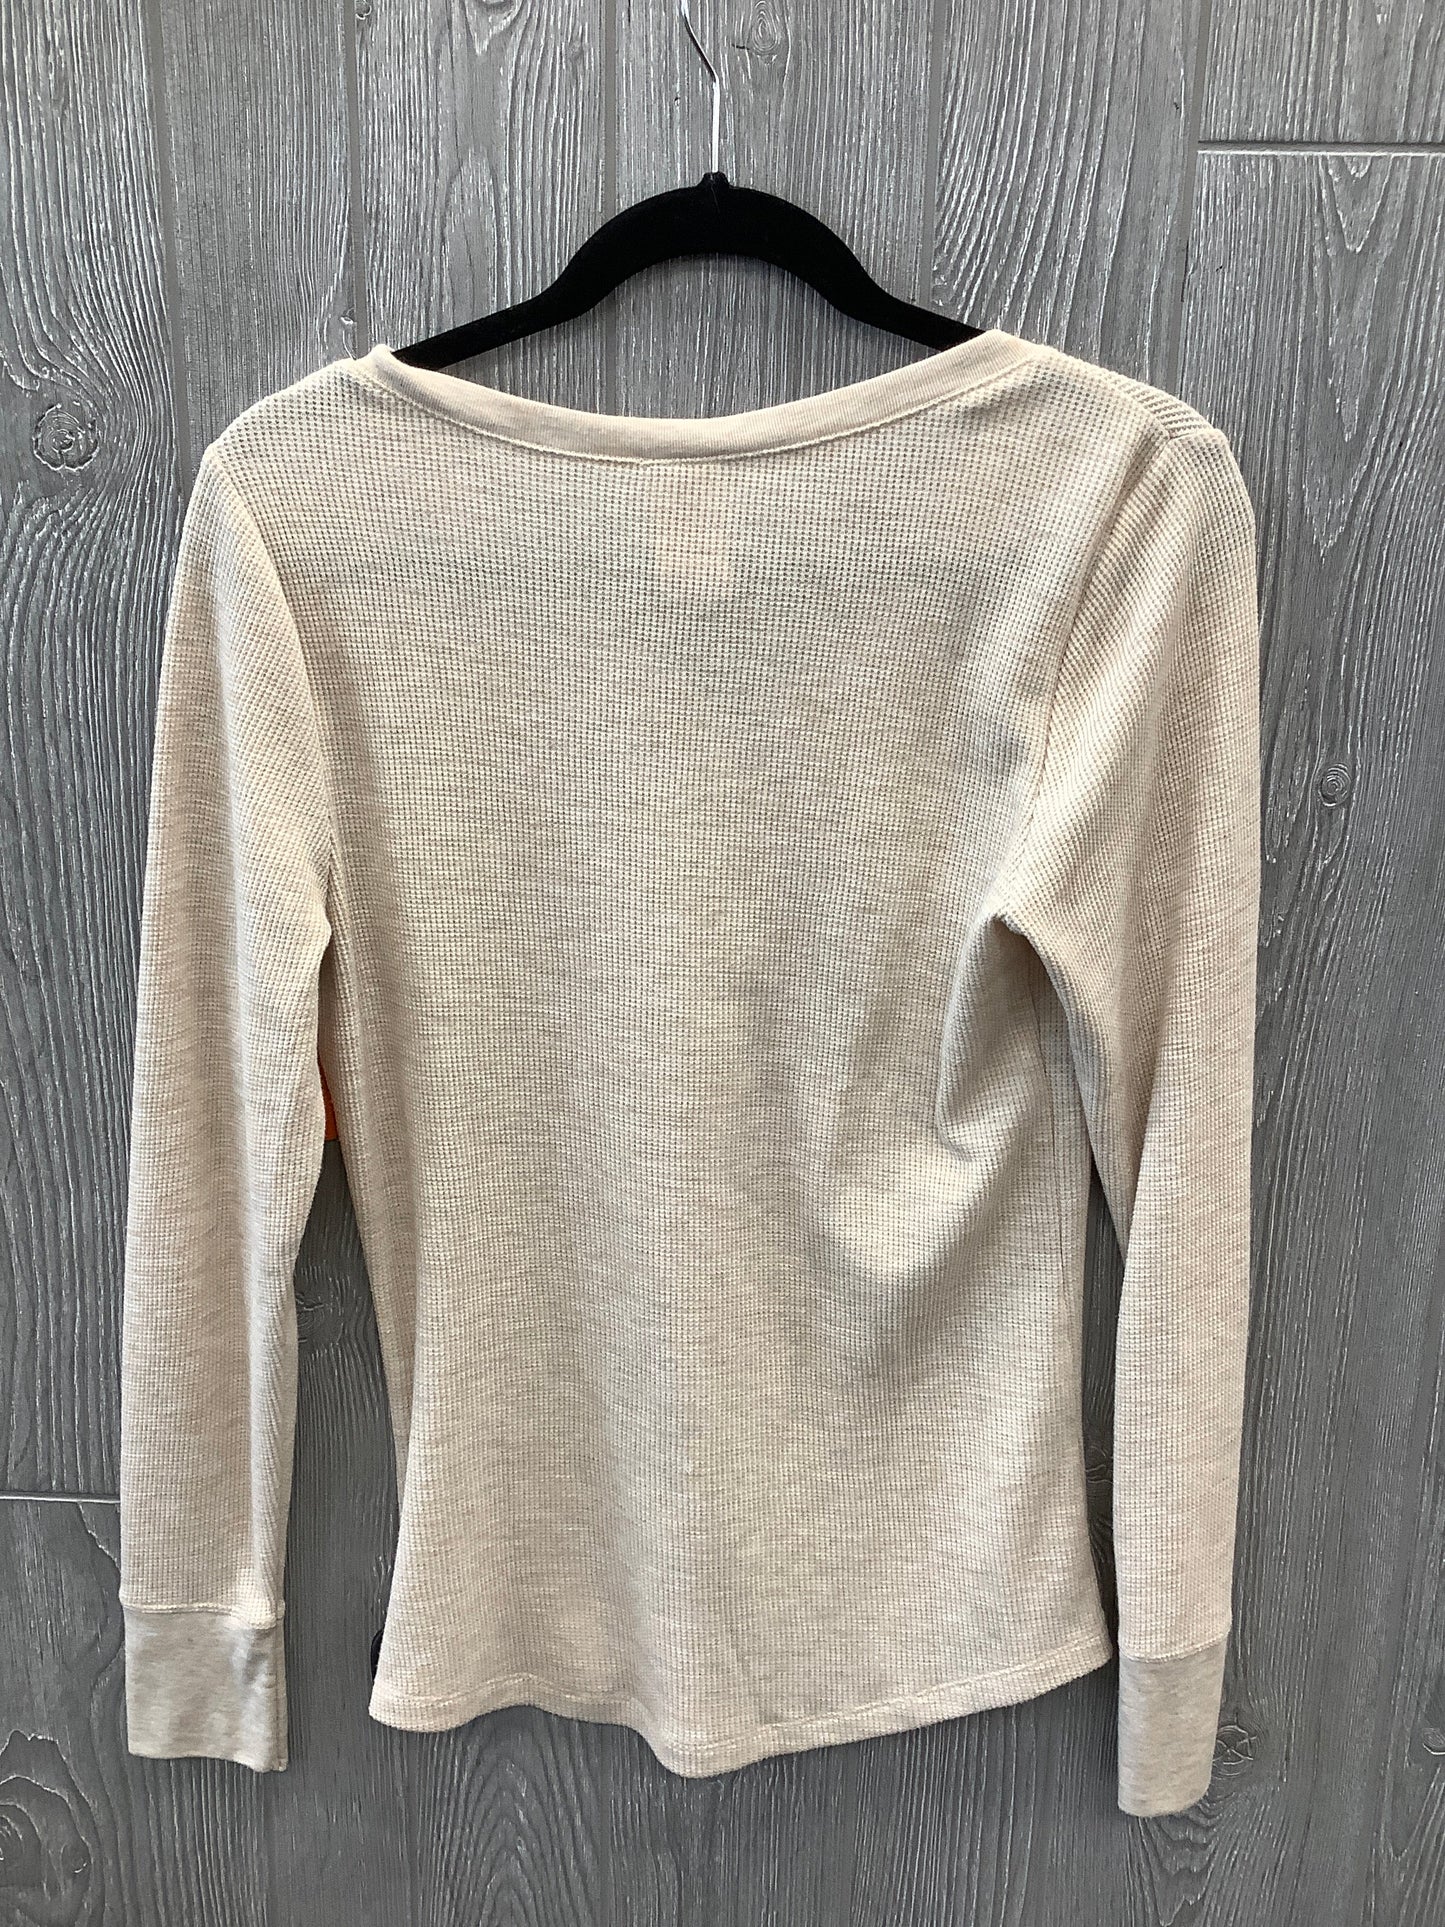 Top Long Sleeve By Faded Glory  Size: M